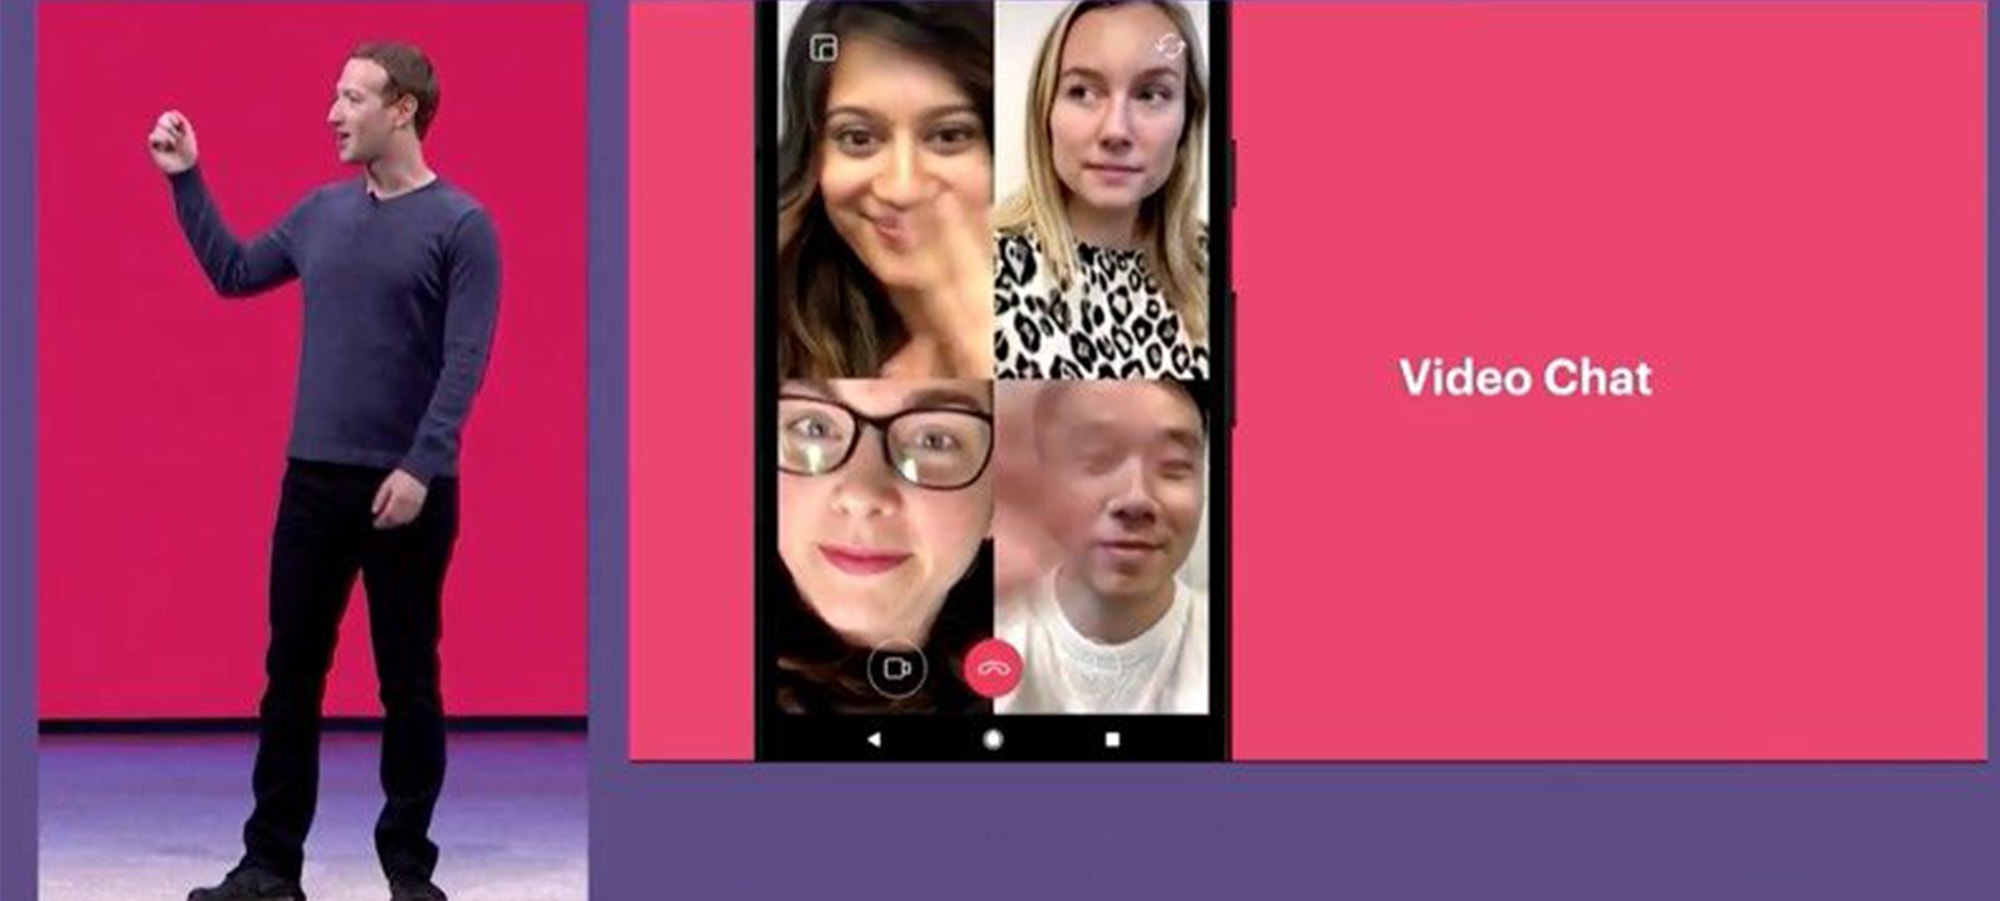 Instagram - Group Video Chat